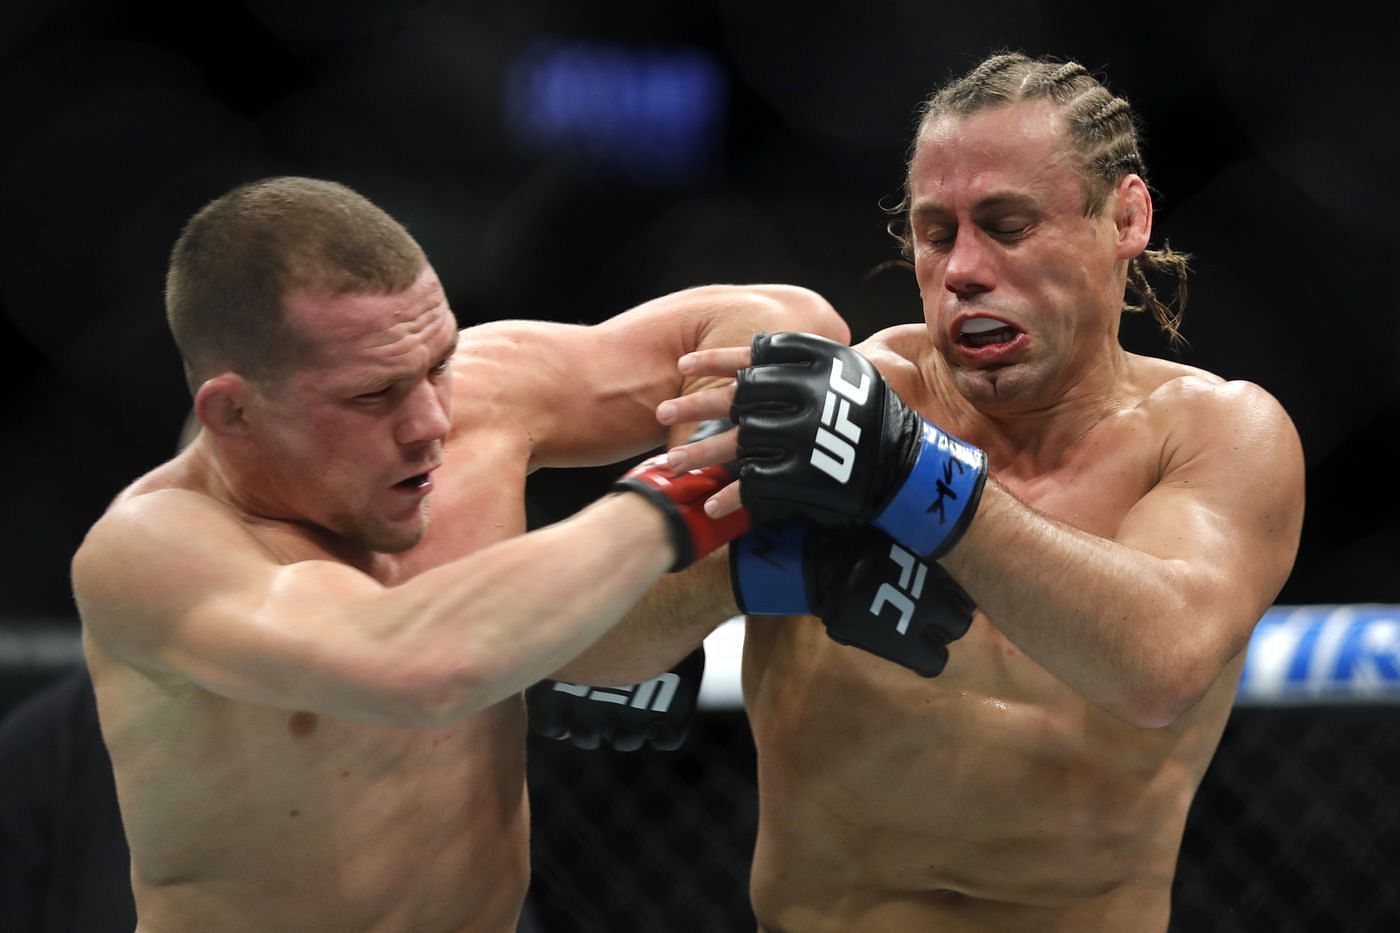 Urijah Faber suffered a horrible beating at the hands of Petr Yan after returning from retirement